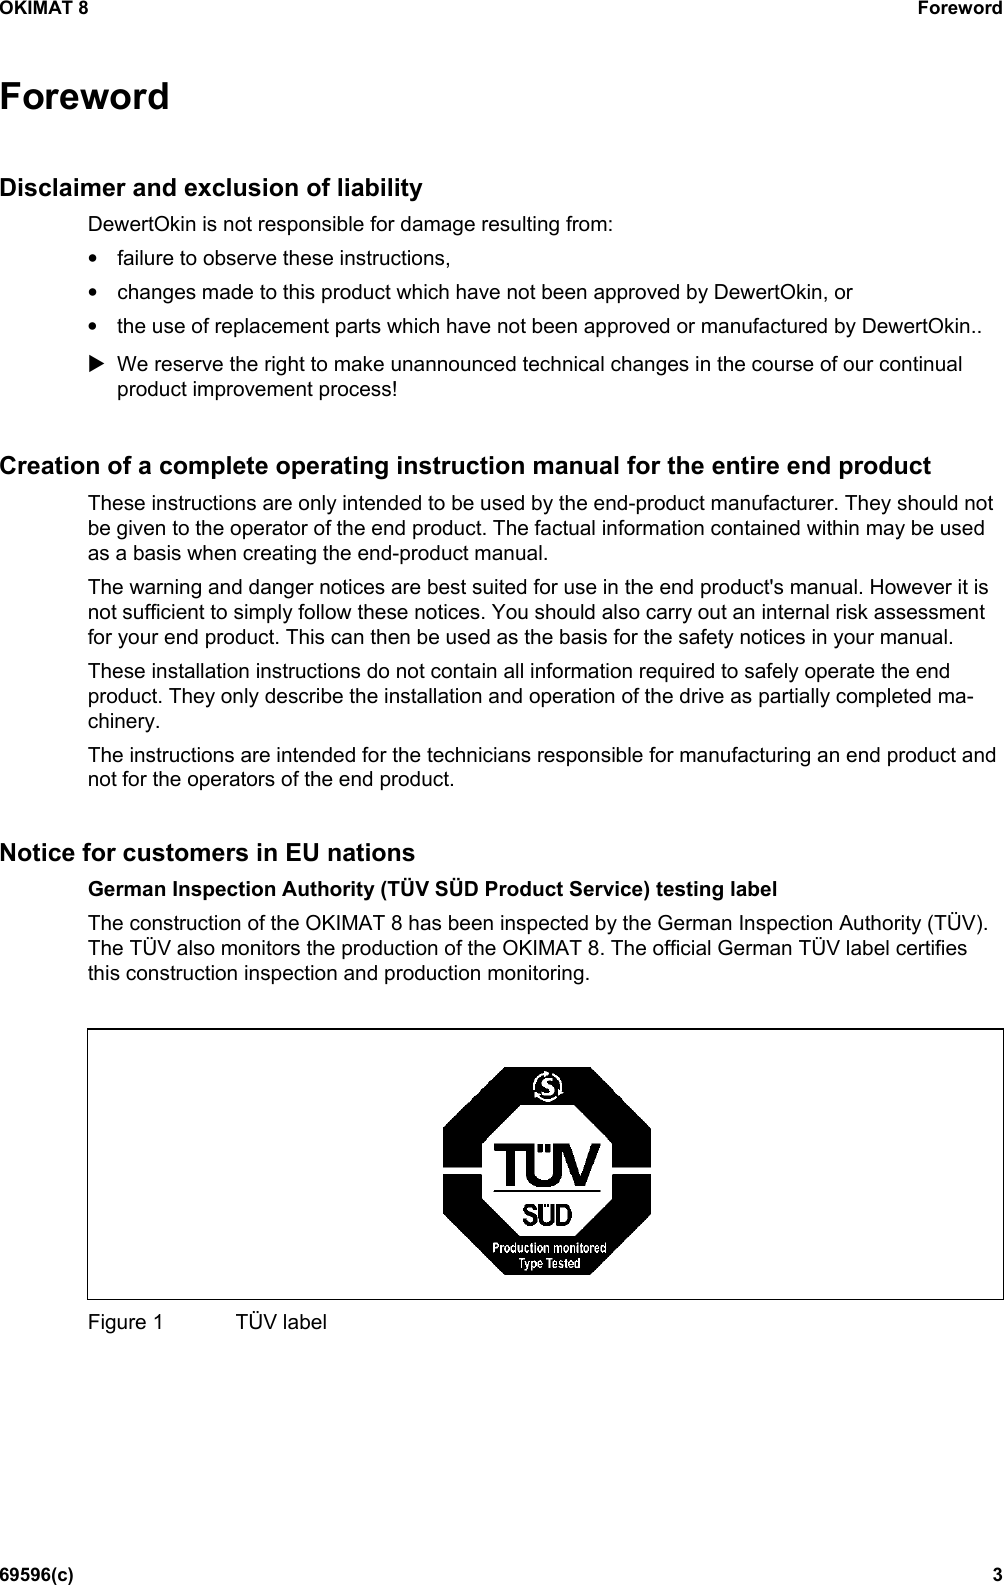 OKIMAT 8 Foreword 69596(c)  3 ForewordDisclaimer and exclusion of liability DewertOkin is not responsible for damage resulting from: •failure to observe these instructions,•changes made to this product which have not been approved by DewertOkin, or•the use of replacement parts which have not been approved or manufactured by DewertOkin..We reserve the right to make unannounced technical changes in the course of our continualproduct improvement process!Creation of a complete operating instruction manual for the entire end product These instructions are only intended to be used by the end-product manufacturer. They should not be given to the operator of the end product. The factual information contained within may be used as a basis when creating the end-product manual. The warning and danger notices are best suited for use in the end product&apos;s manual. However it is not sufficient to simply follow these notices. You should also carry out an internal risk assessment for your end product. This can then be used as the basis for the safety notices in your manual. These installation instructions do not contain all information required to safely operate the end product. They only describe the installation and operation of the drive as partially completed ma-chinery. The instructions are intended for the technicians responsible for manufacturing an end product and not for the operators of the end product. Notice for customers in EU nations German Inspection Authority (TÜV SÜD Product Service) testing label The construction of the OKIMAT 8 has been inspected by the German Inspection Authority (TÜV). The TÜV also monitors the production of the OKIMAT 8. The official German TÜV label certifies this construction inspection and production monitoring. Figure 1  TÜV label 